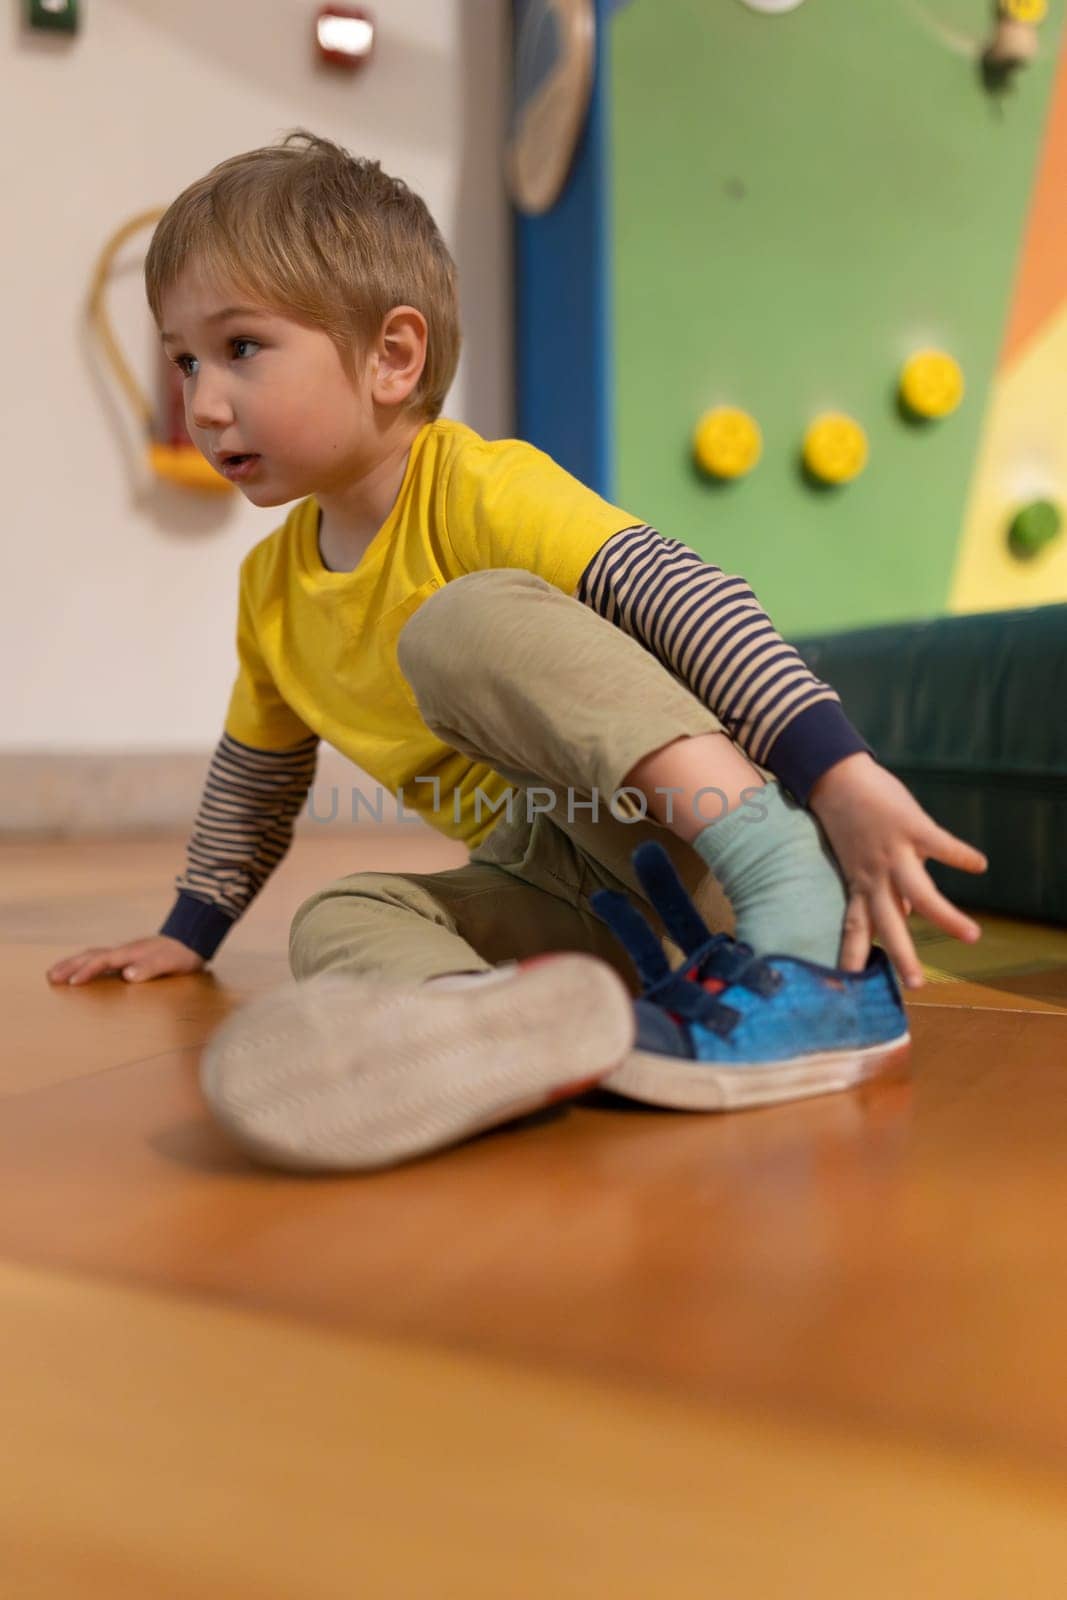 A young boy is sitting on the floor with his feet up. He is wearing a yellow shirt and blue shoes